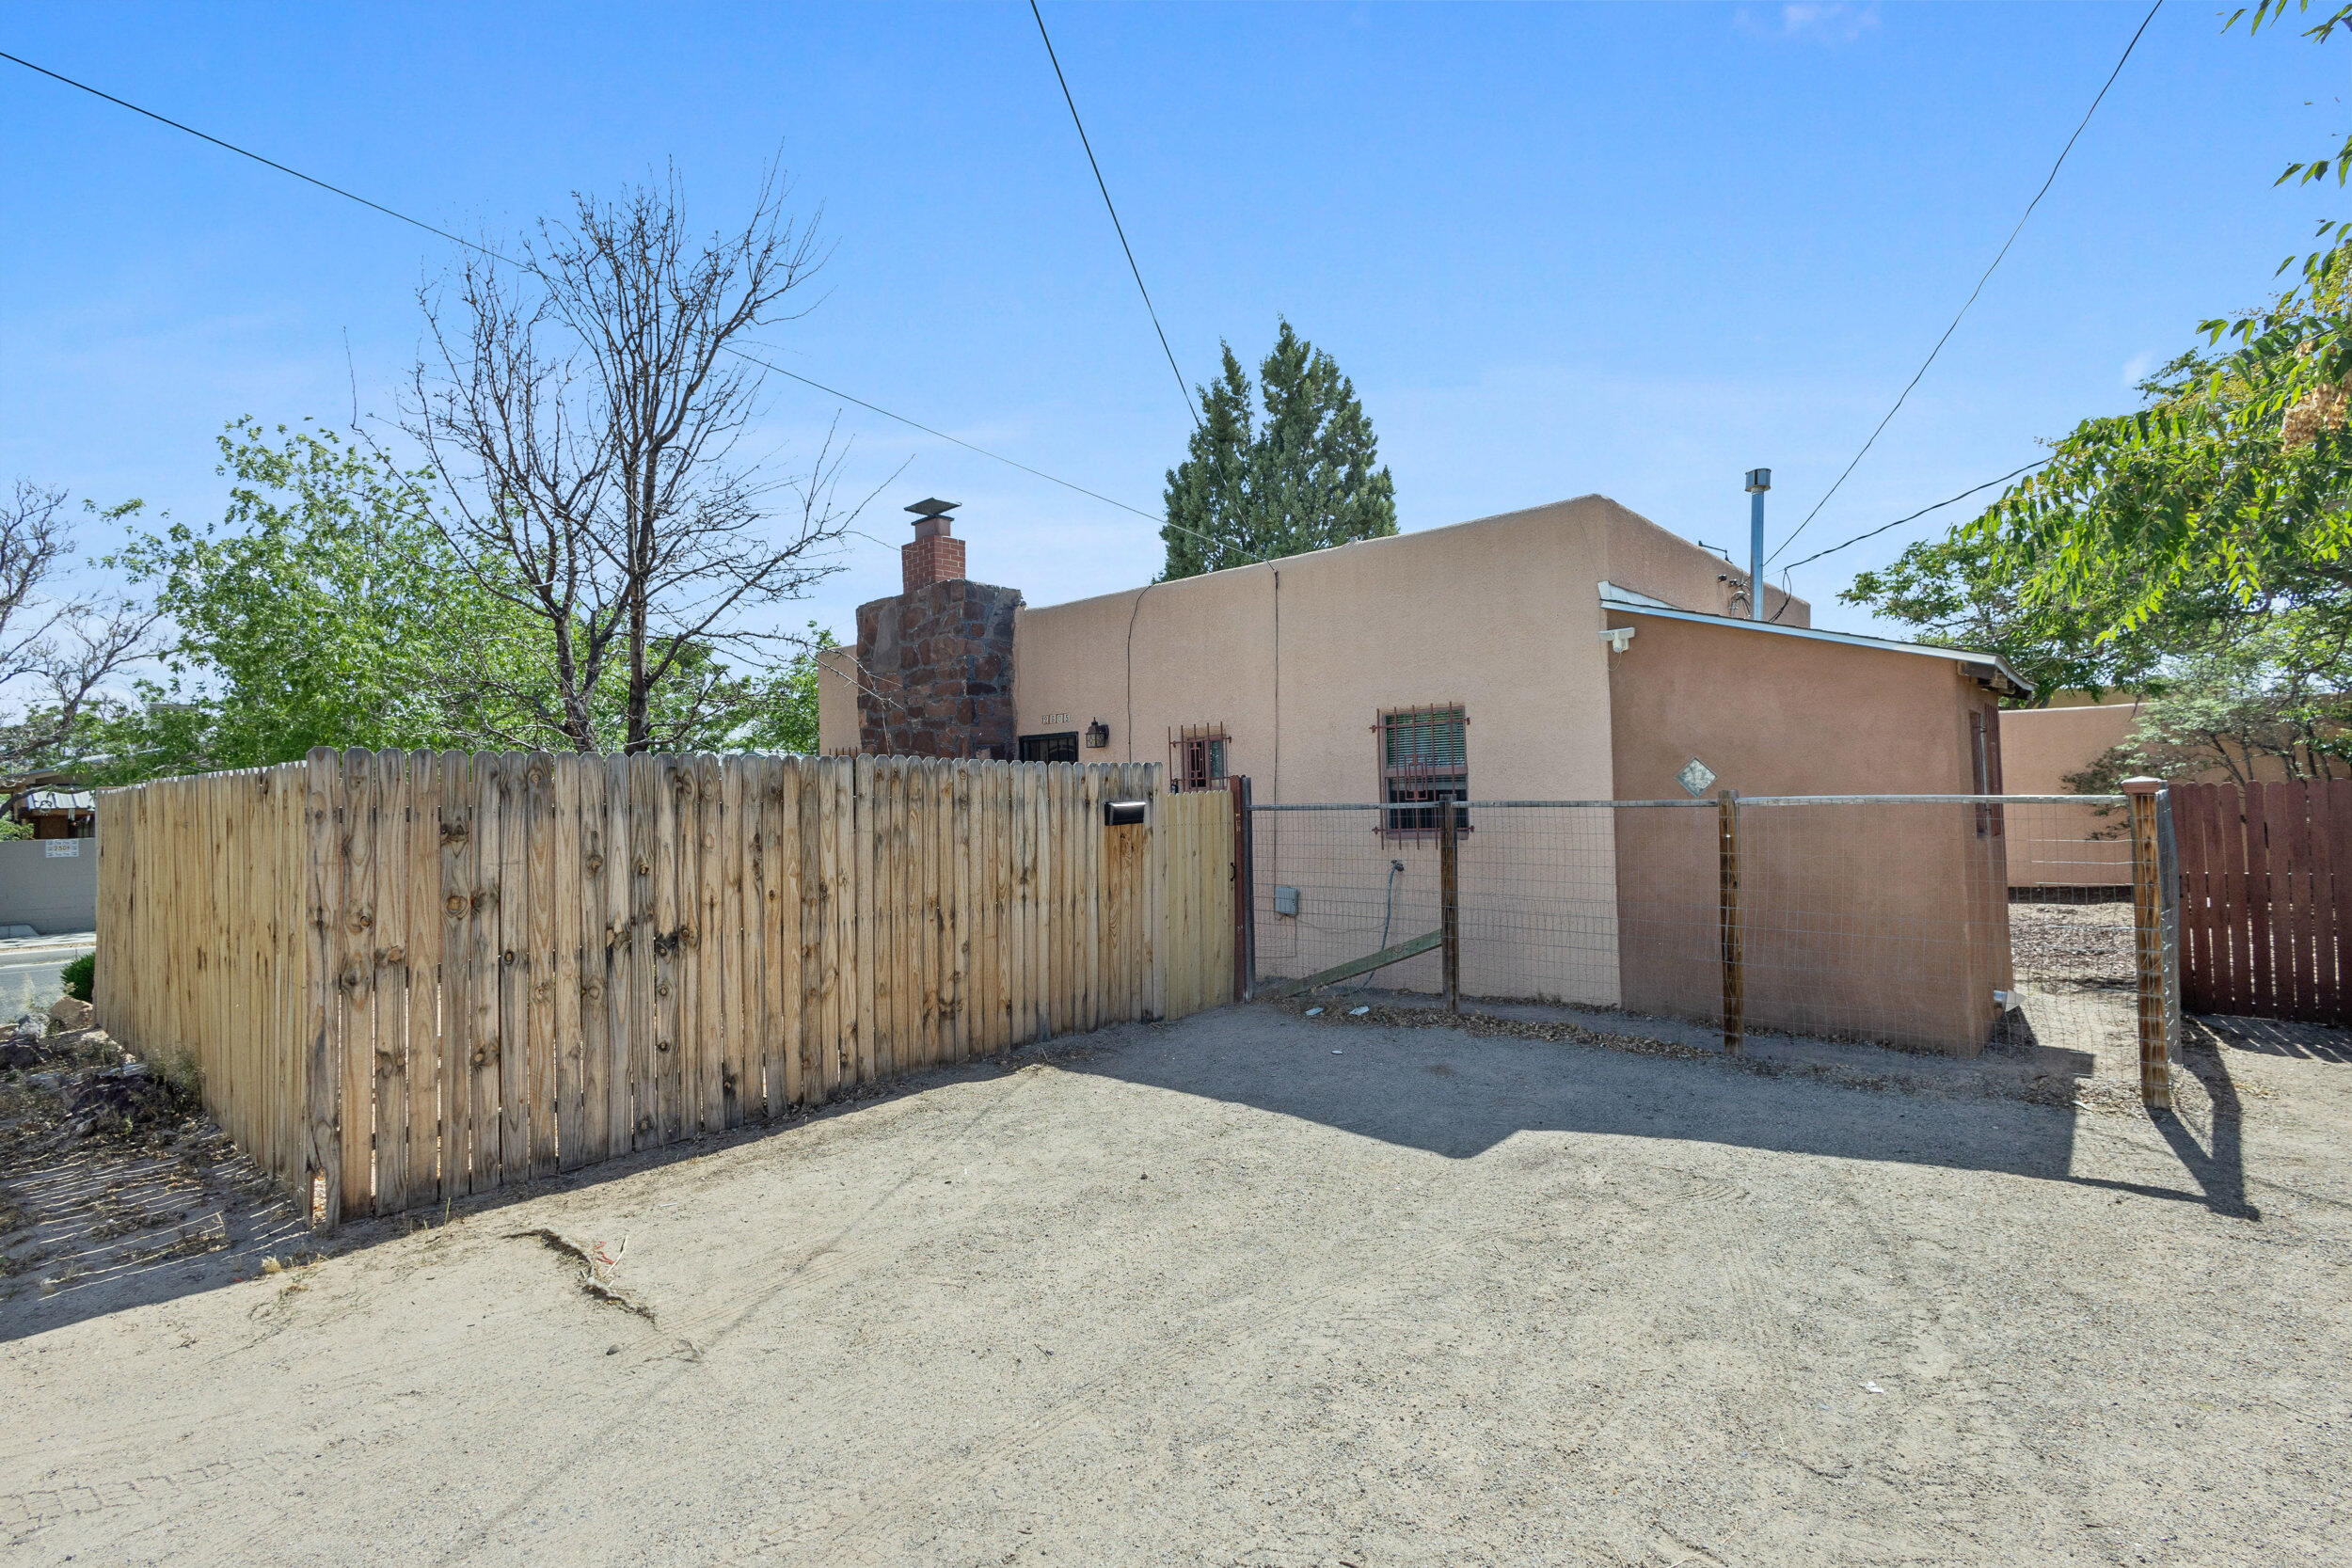 Charming 2 Bedroom/ 1 Bathroom, with fireplace 3 blks from UNM, adjacent to Nob Hill, easy access to Downtown/Uptown/Airport/Kirtland AFB/Sandia Labs. Hardwood floors.  Off street parking for 2 cars. Fenced and walled backyard for privacy. Only lender required repairs will be considered.